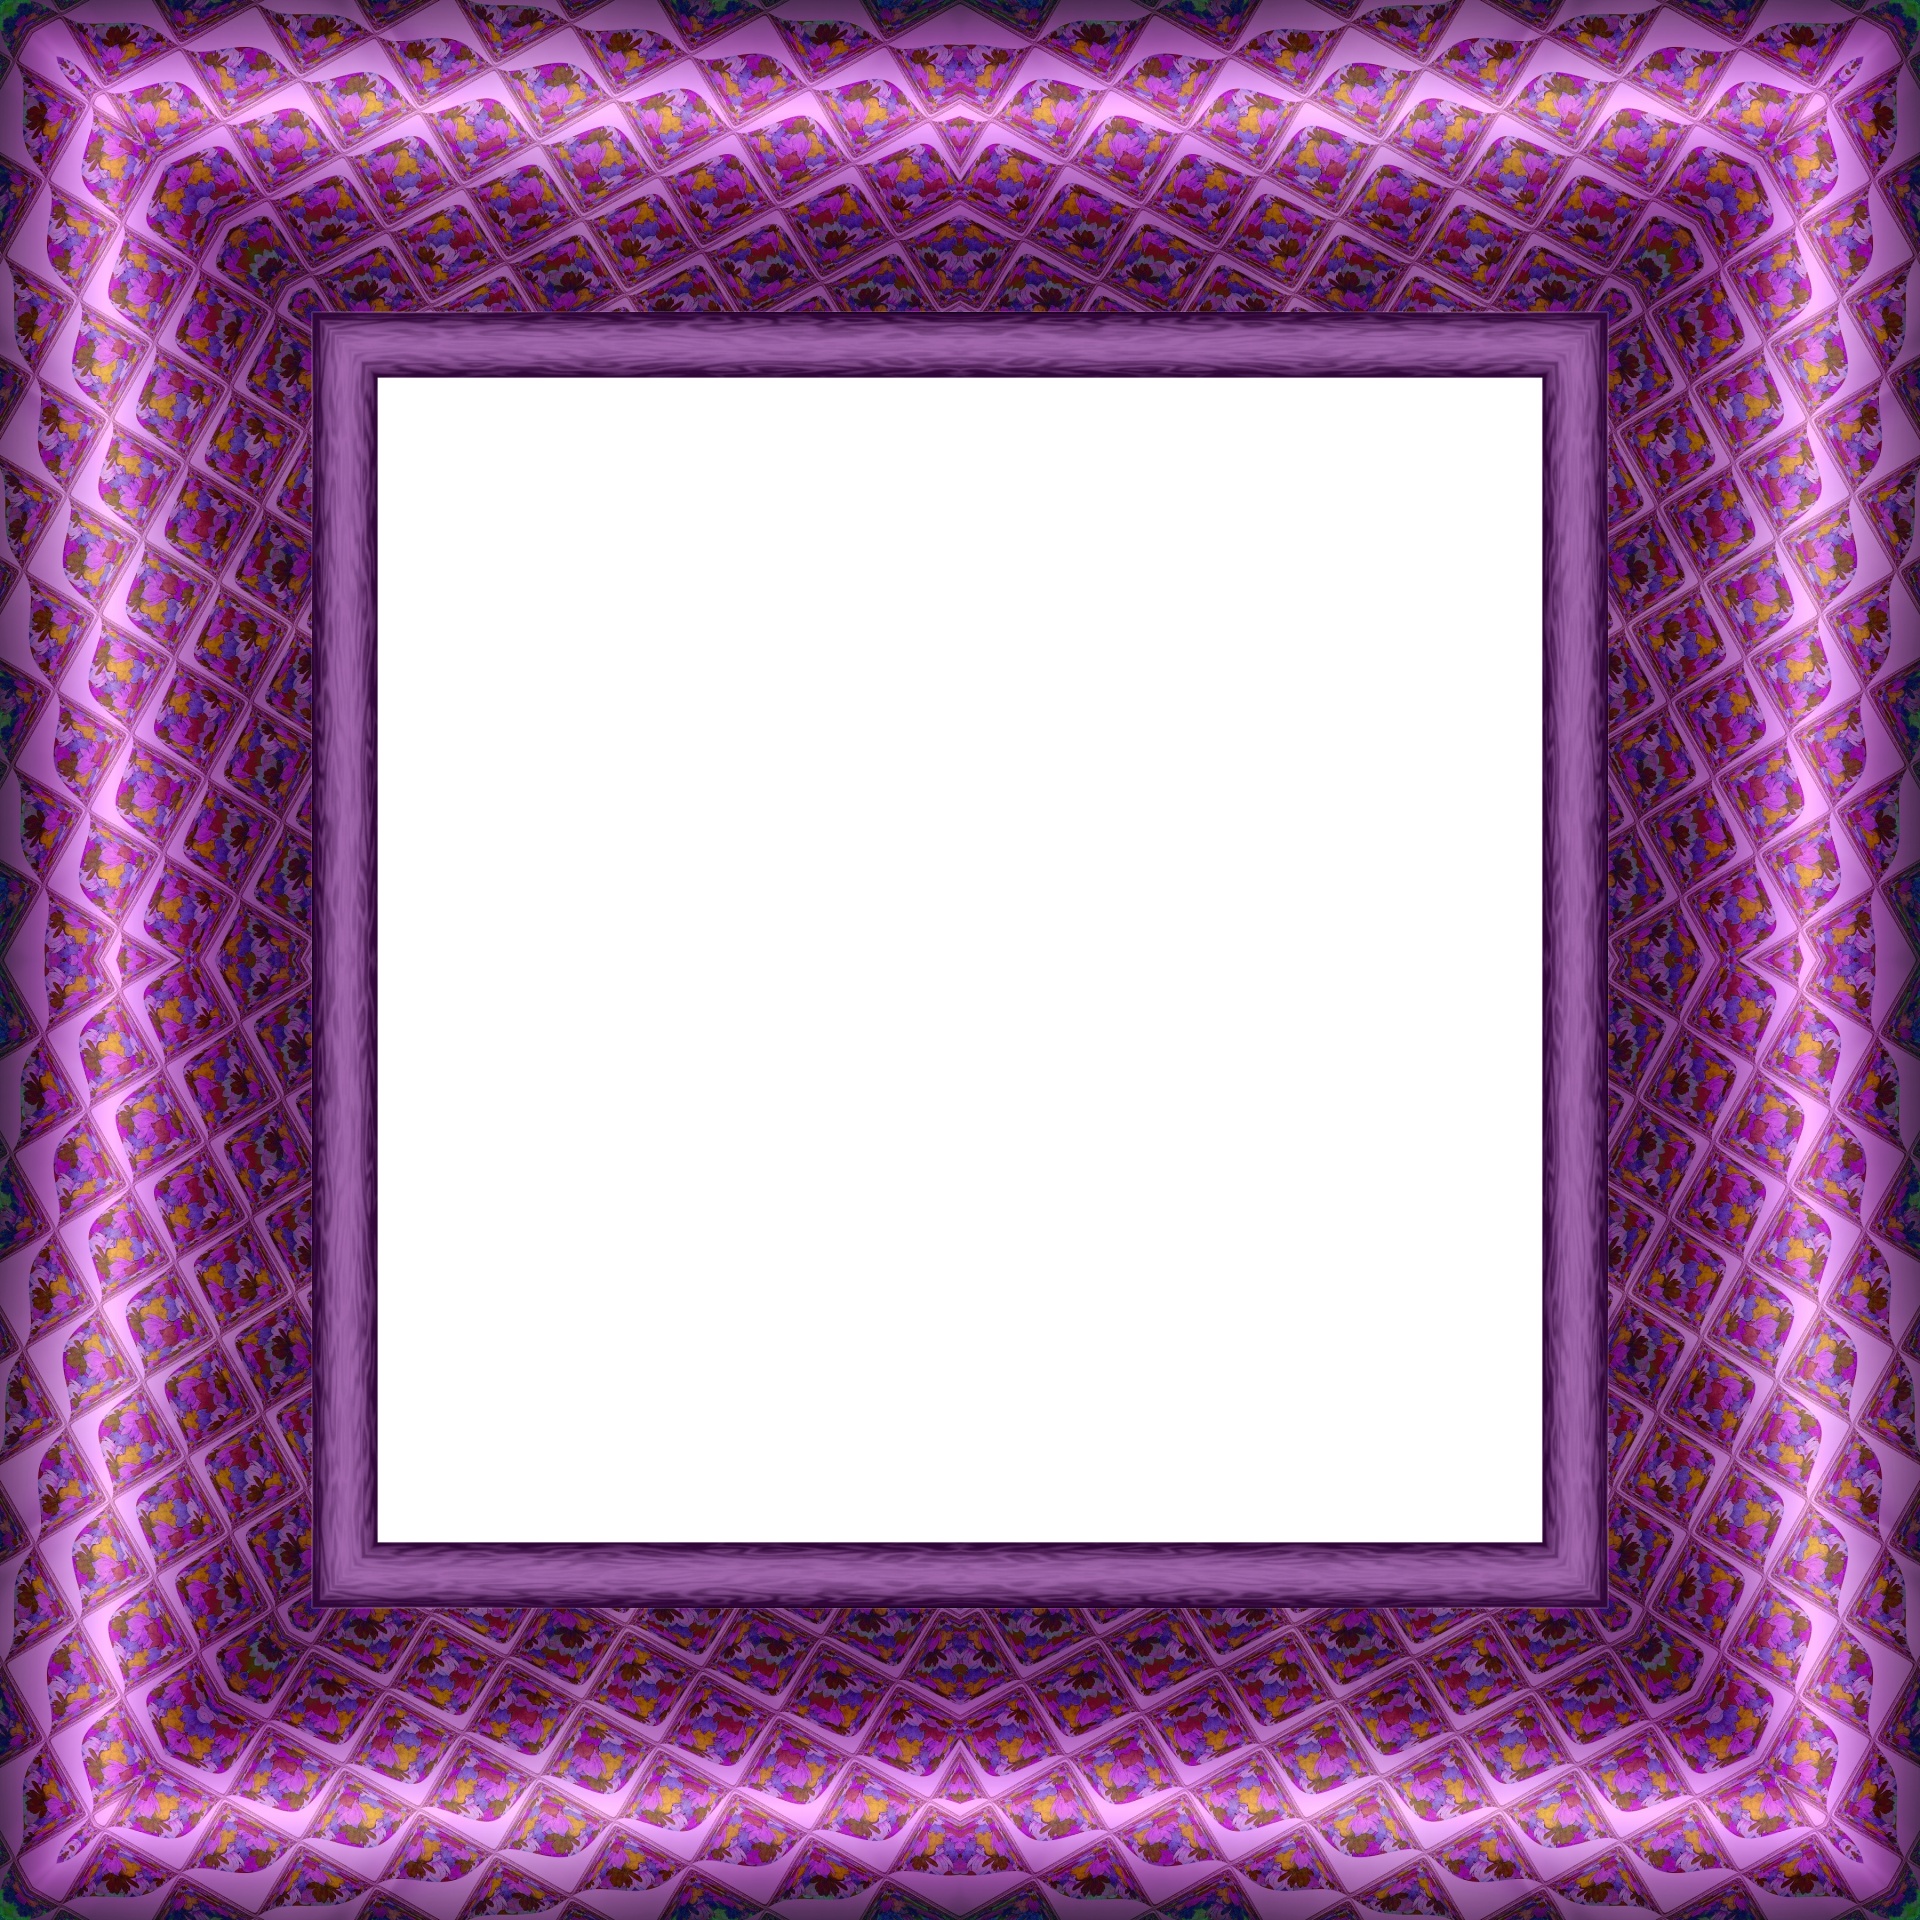 Intricate repeat pattern on sleek gleaming picture frame. Interlocking diamond detail on this gleaming pink mauve frame is royalty free image for wall art.